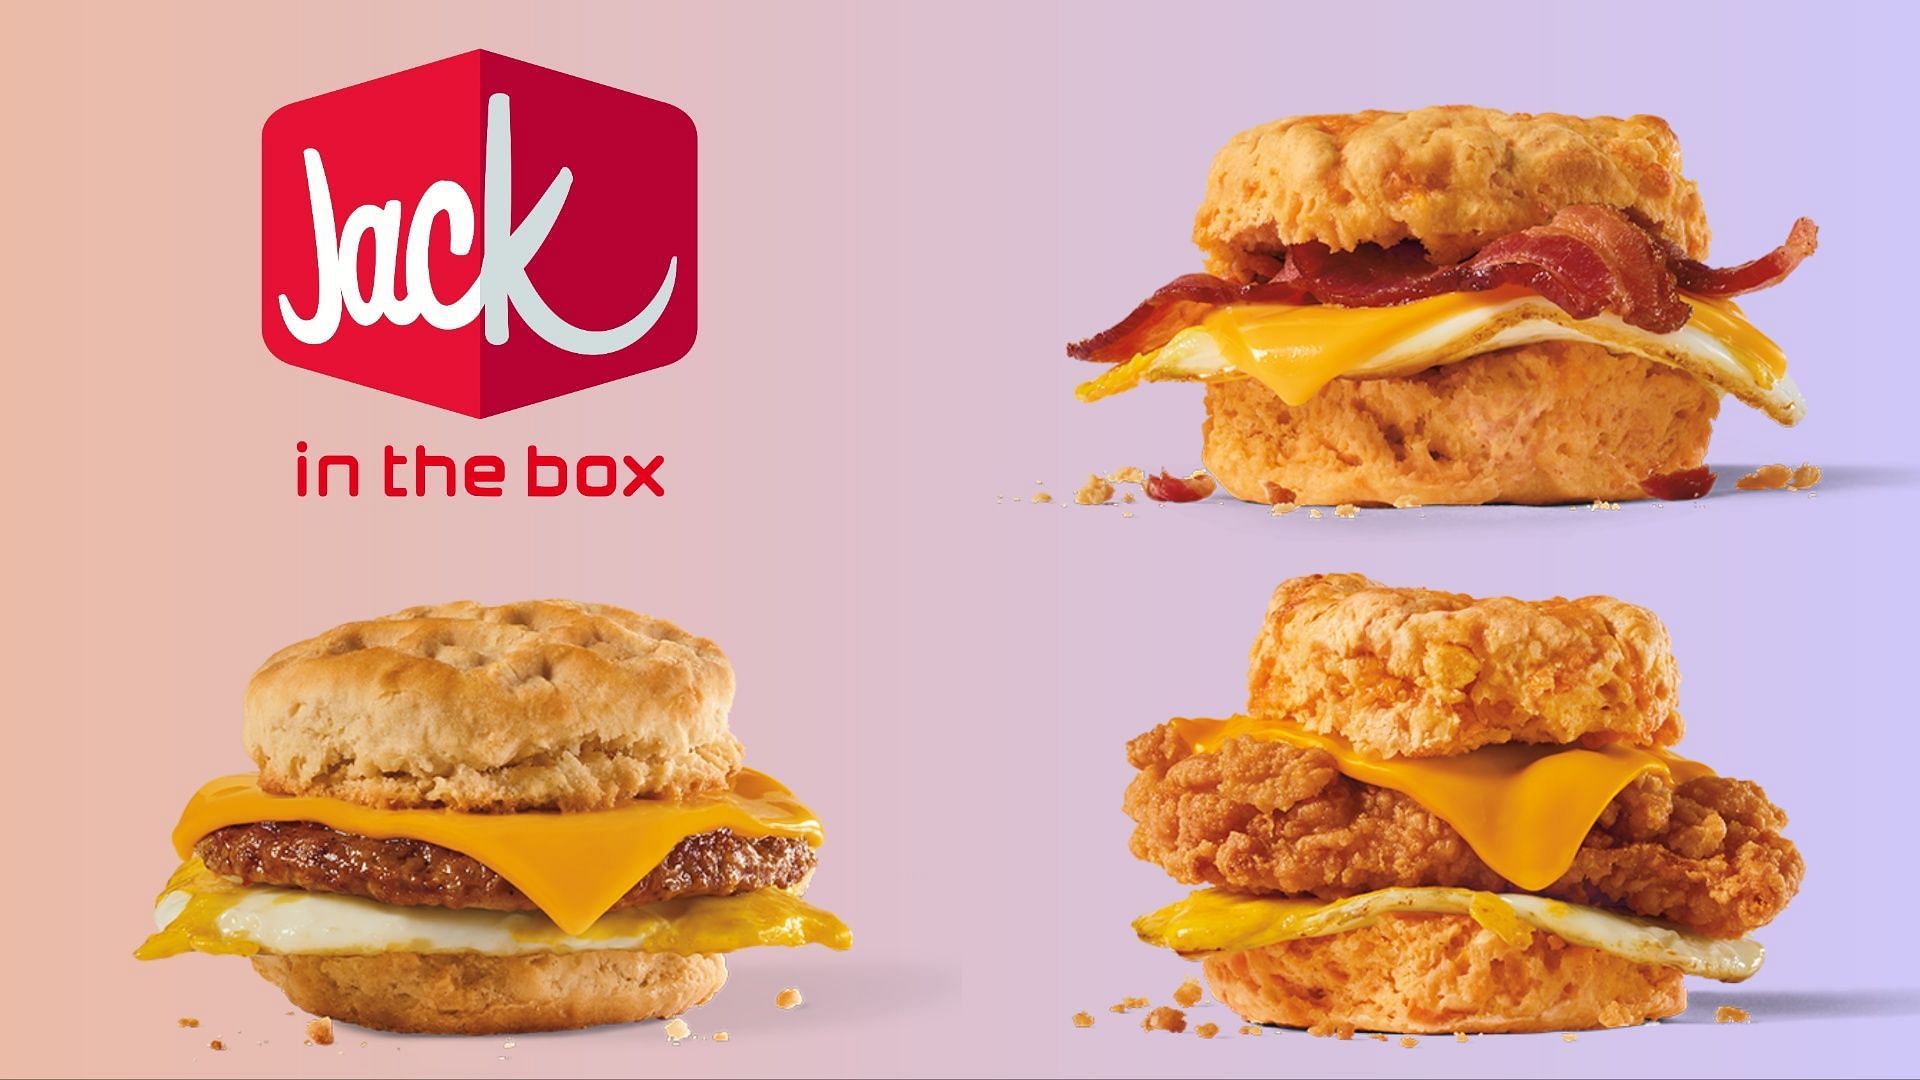 Jack in the box brings back the Cheddar Biscuit Breakfast Sandwiches to the menu (Image via Jack in the Box)